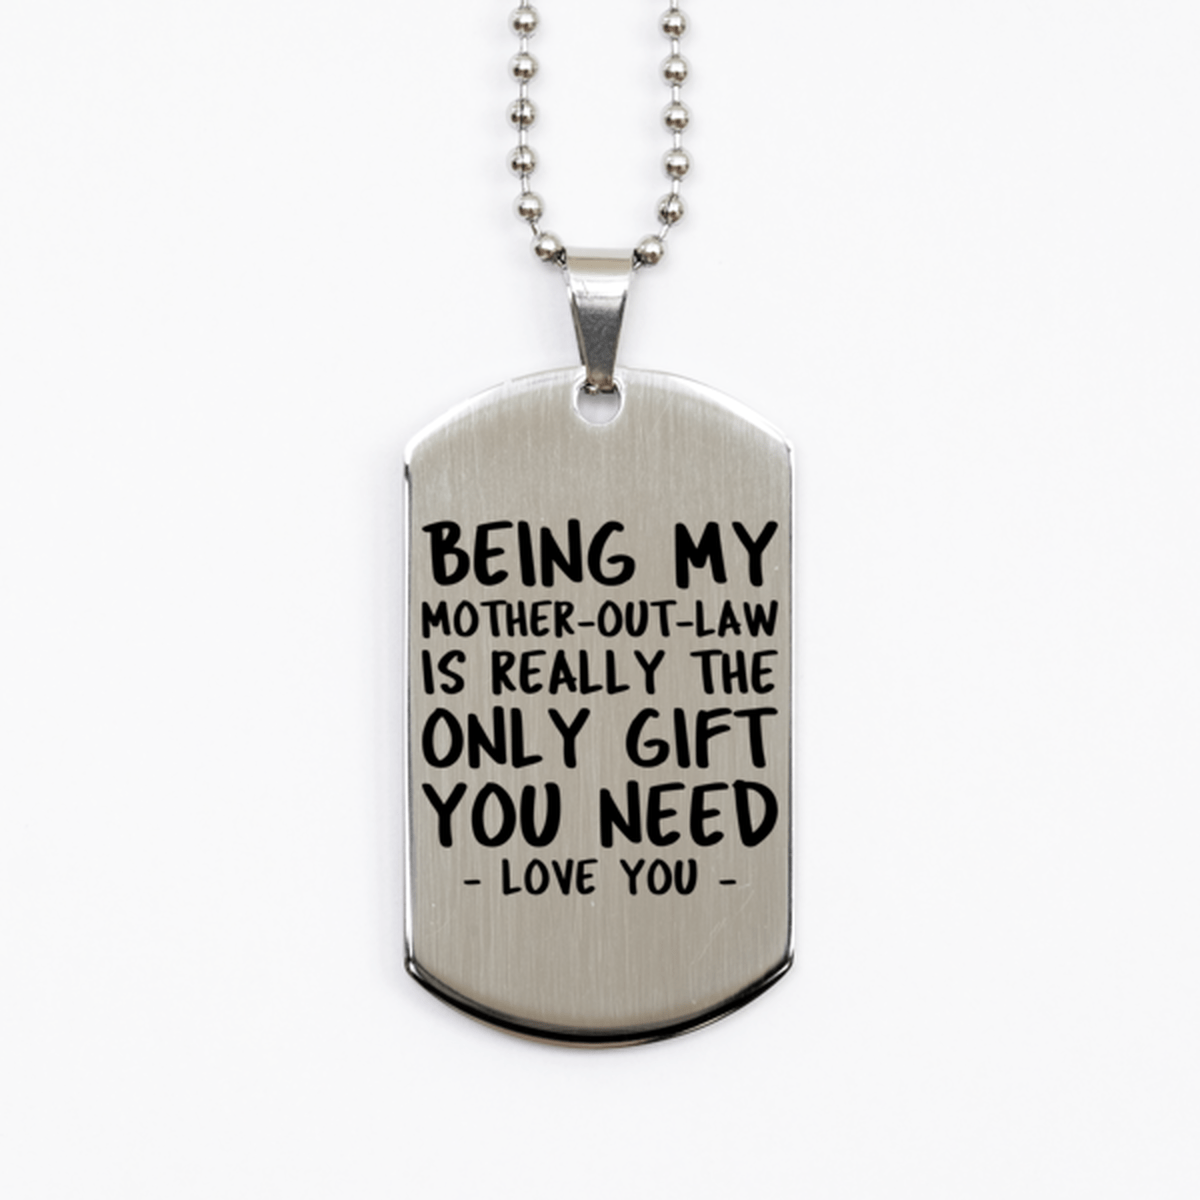 Funny Mother-out-law Silver Dog Tag Necklace, Being My Mother-out-law Is Really the Only Gift You Need, Best Birthday Gifts for Mother-out-law